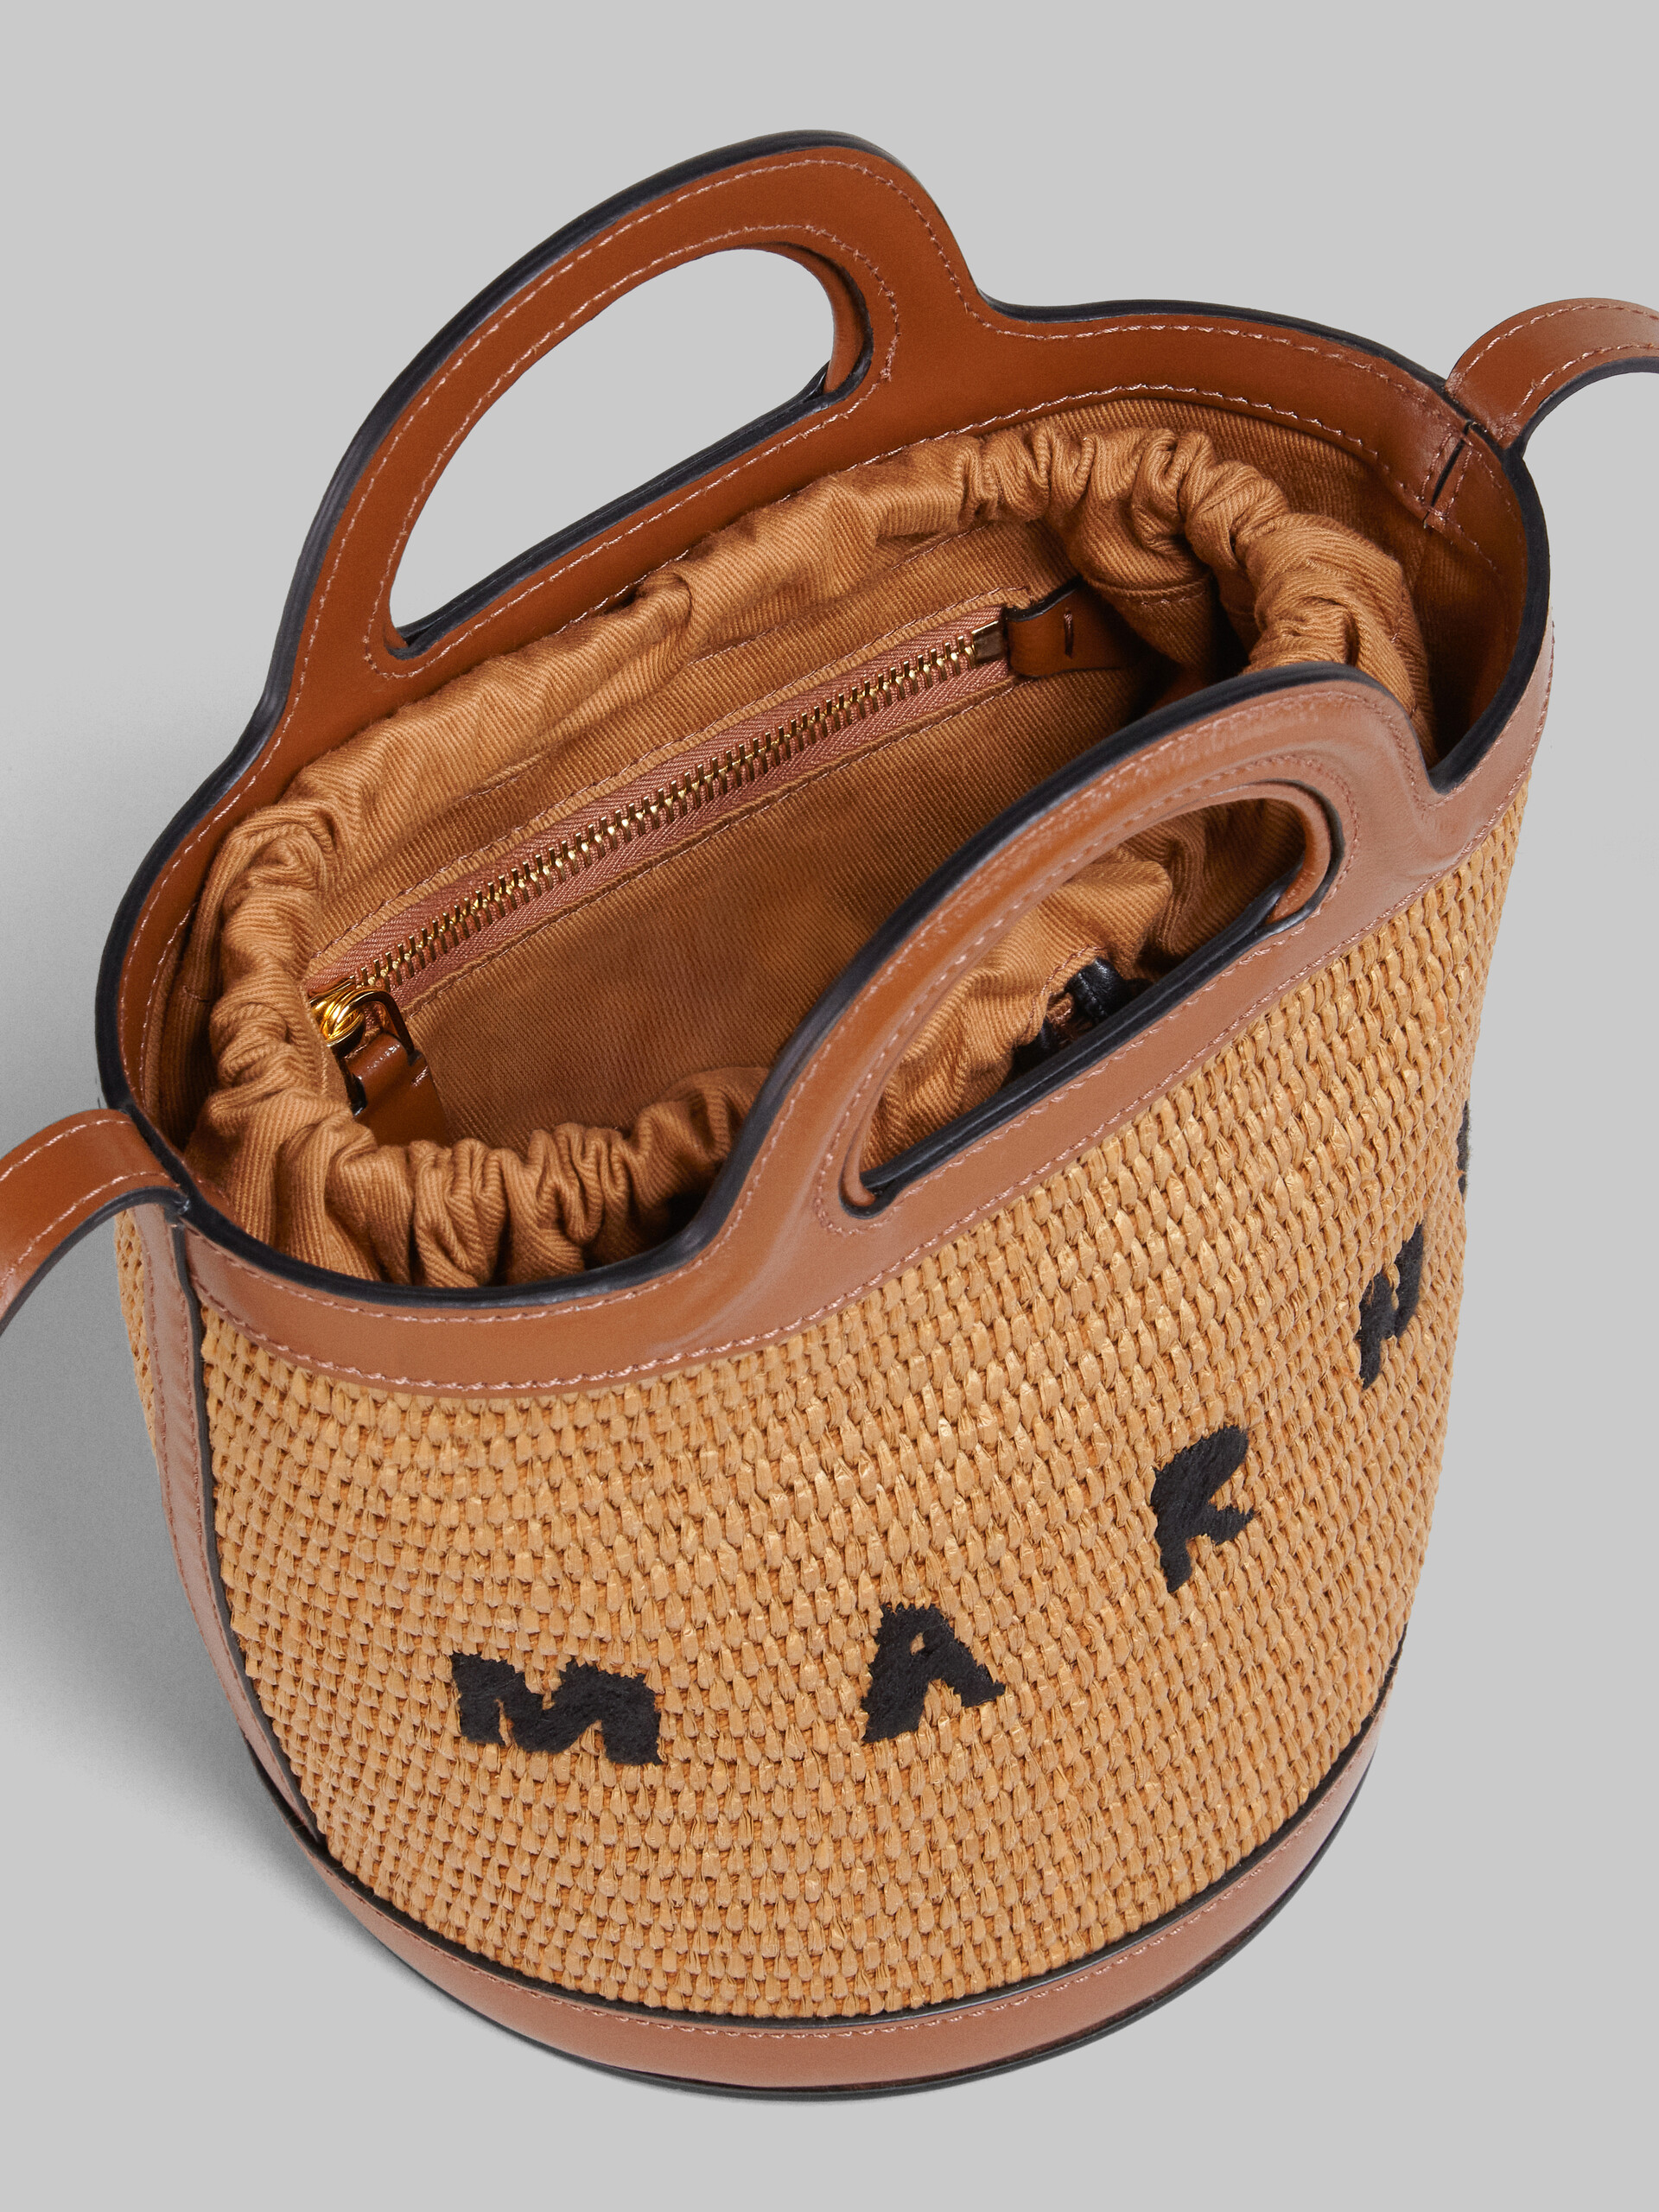 TROPICALIA mini bucket bag in brown leather and raffia - Shoulder Bags - Image 5